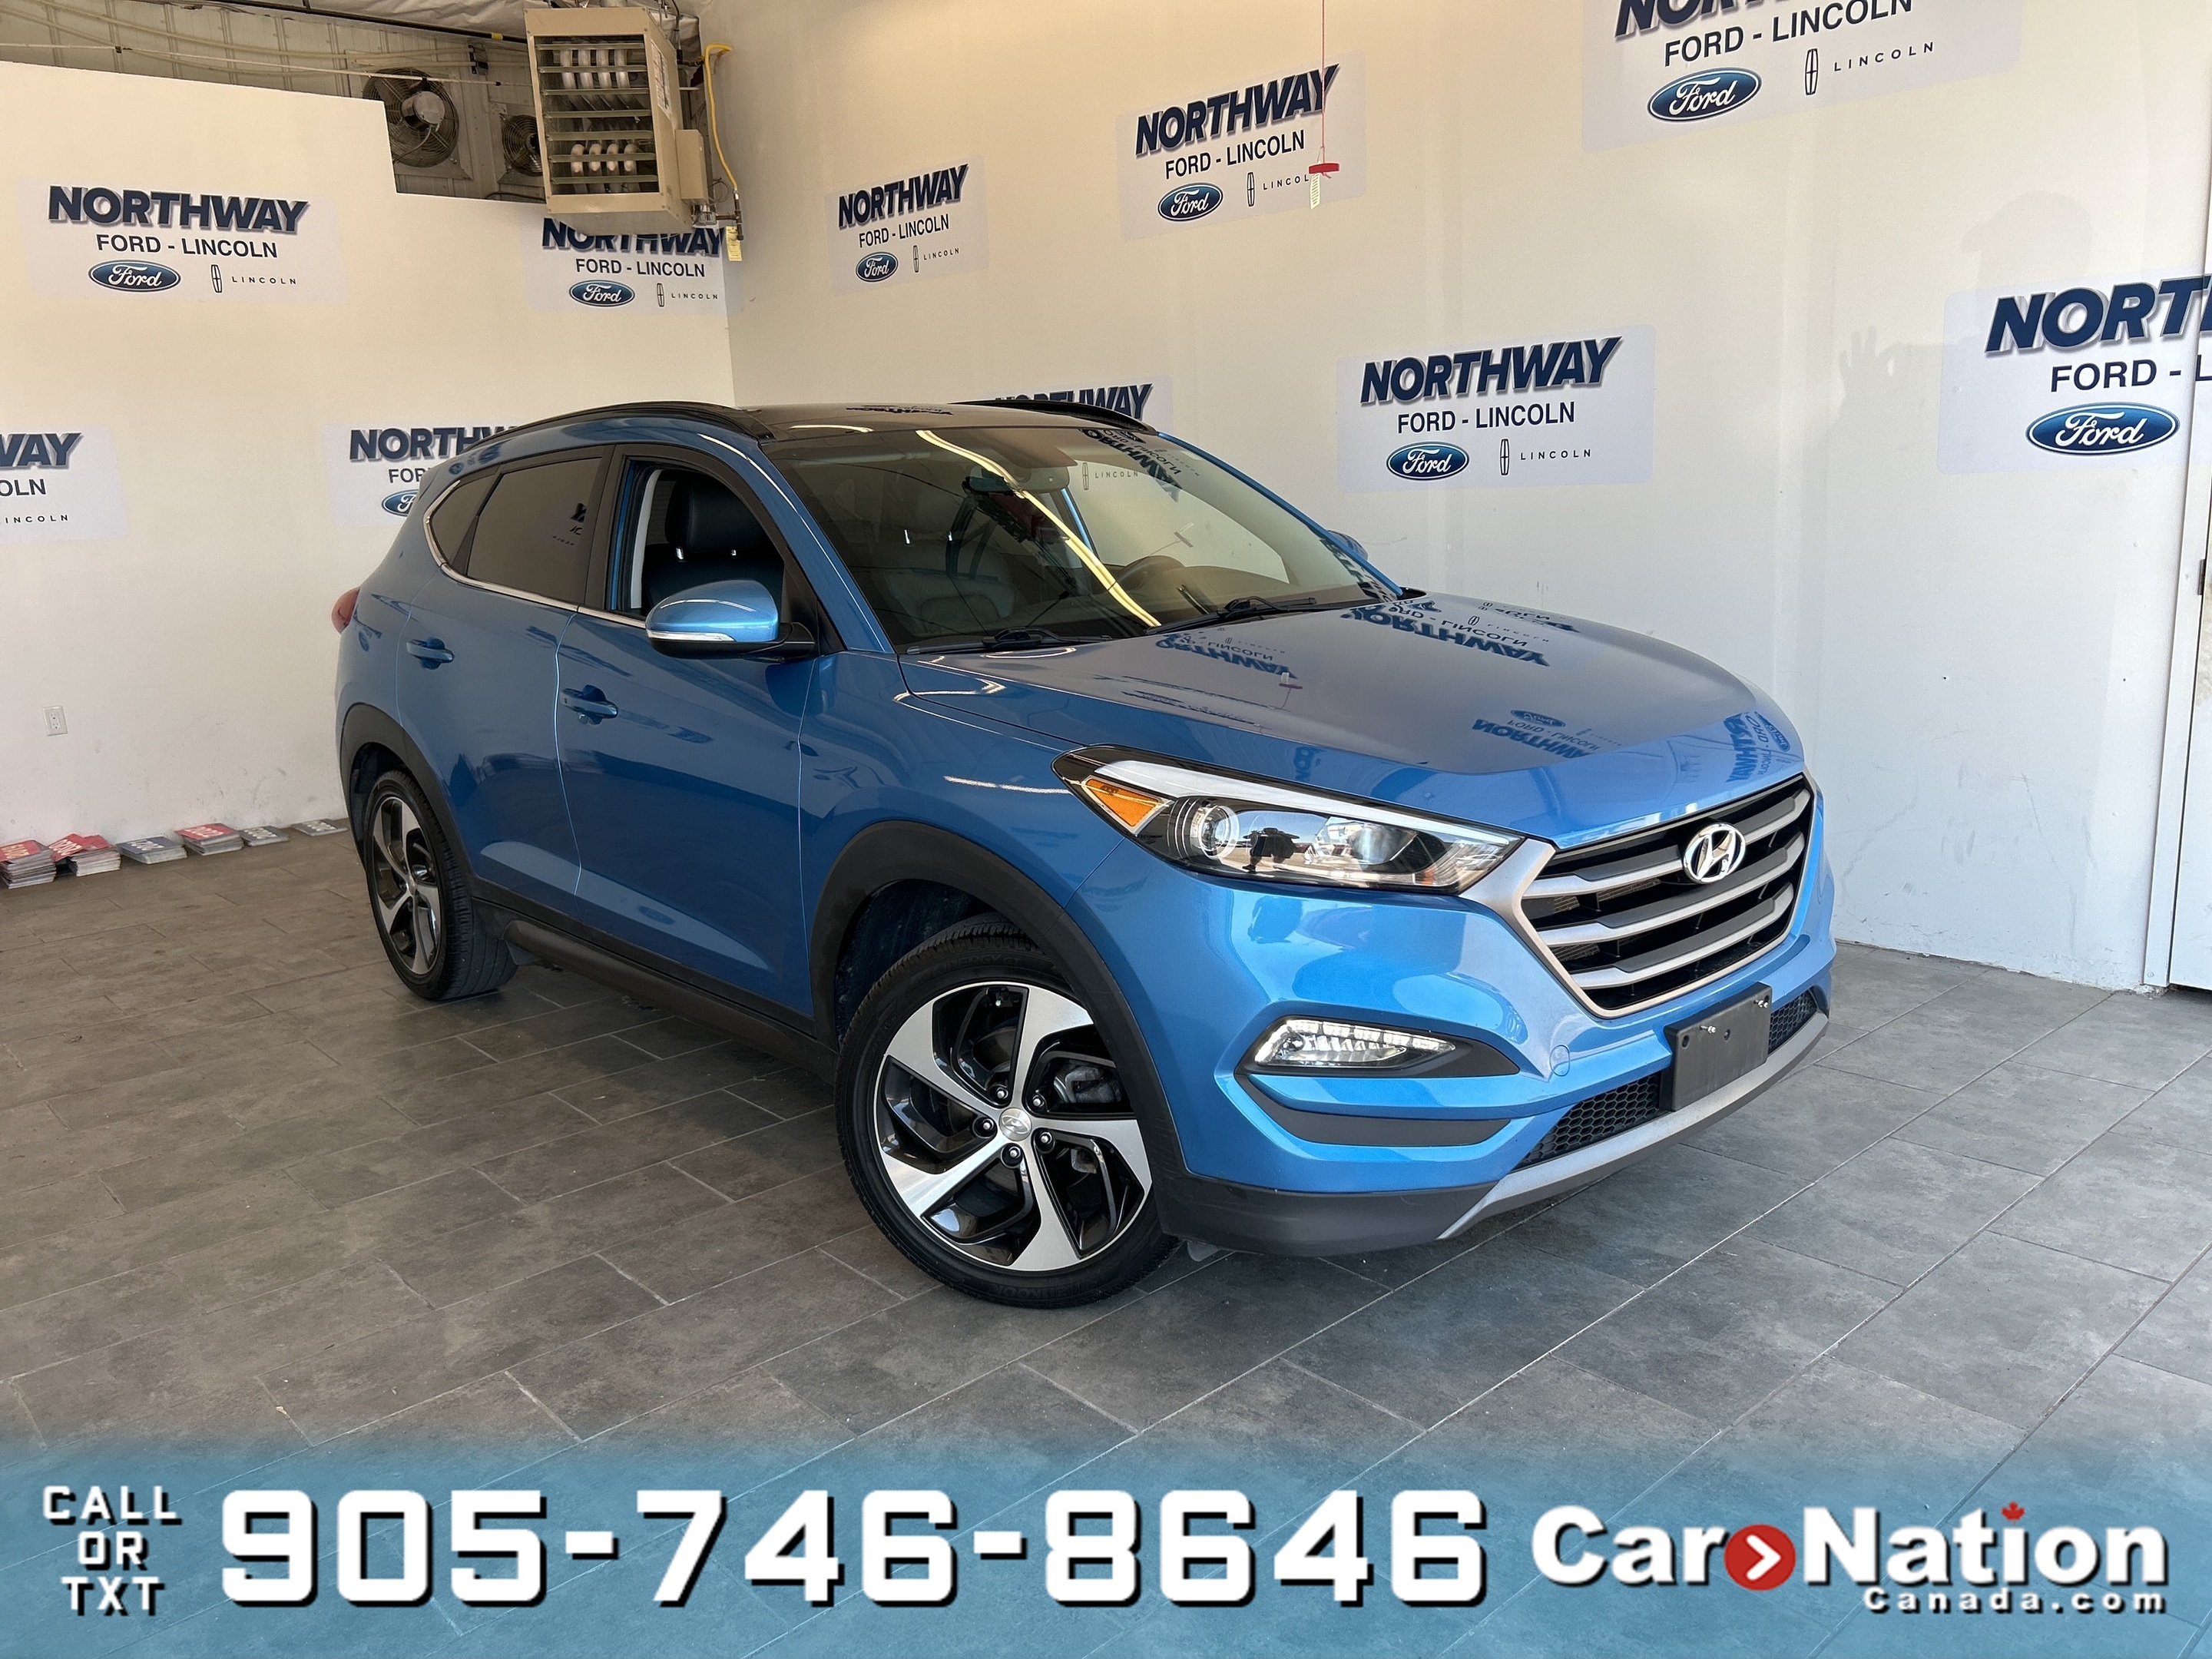 2016 Hyundai Tucson LIMITED | AWD | LEATHER | PANO ROOF | NAV | LOW KM